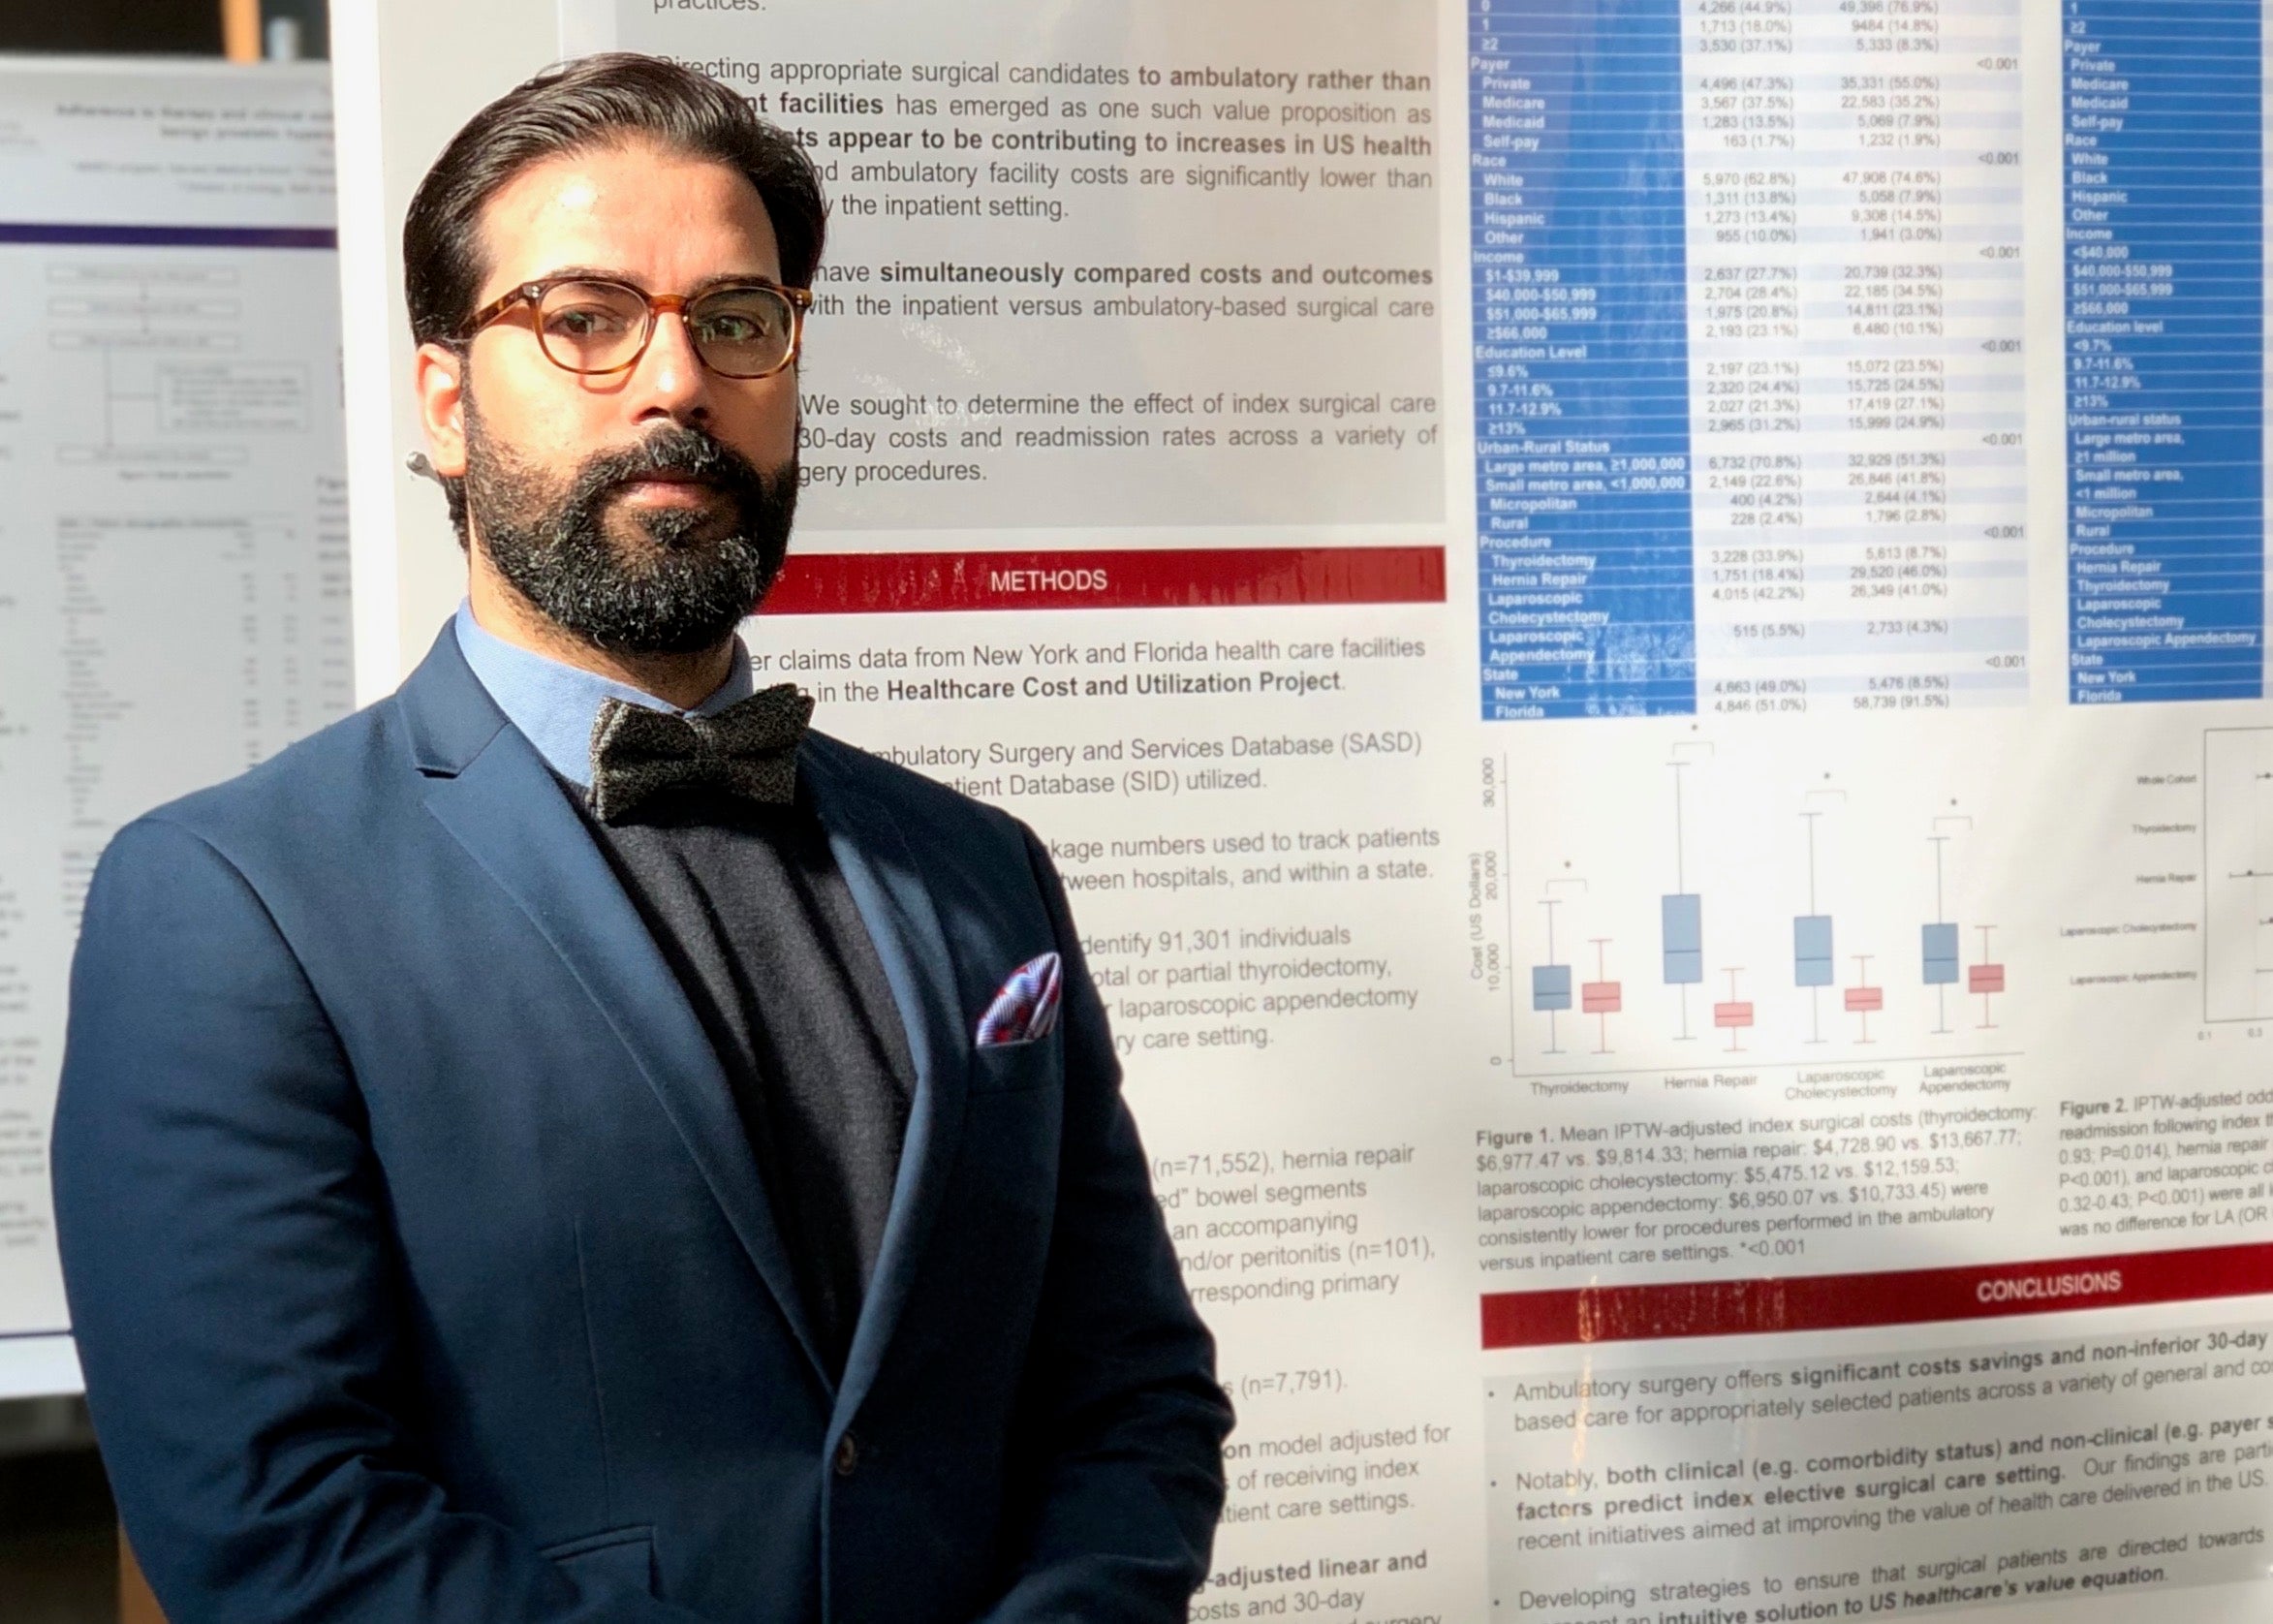 Photo of Junaid Nabi in a suit standing in front of a research poster.